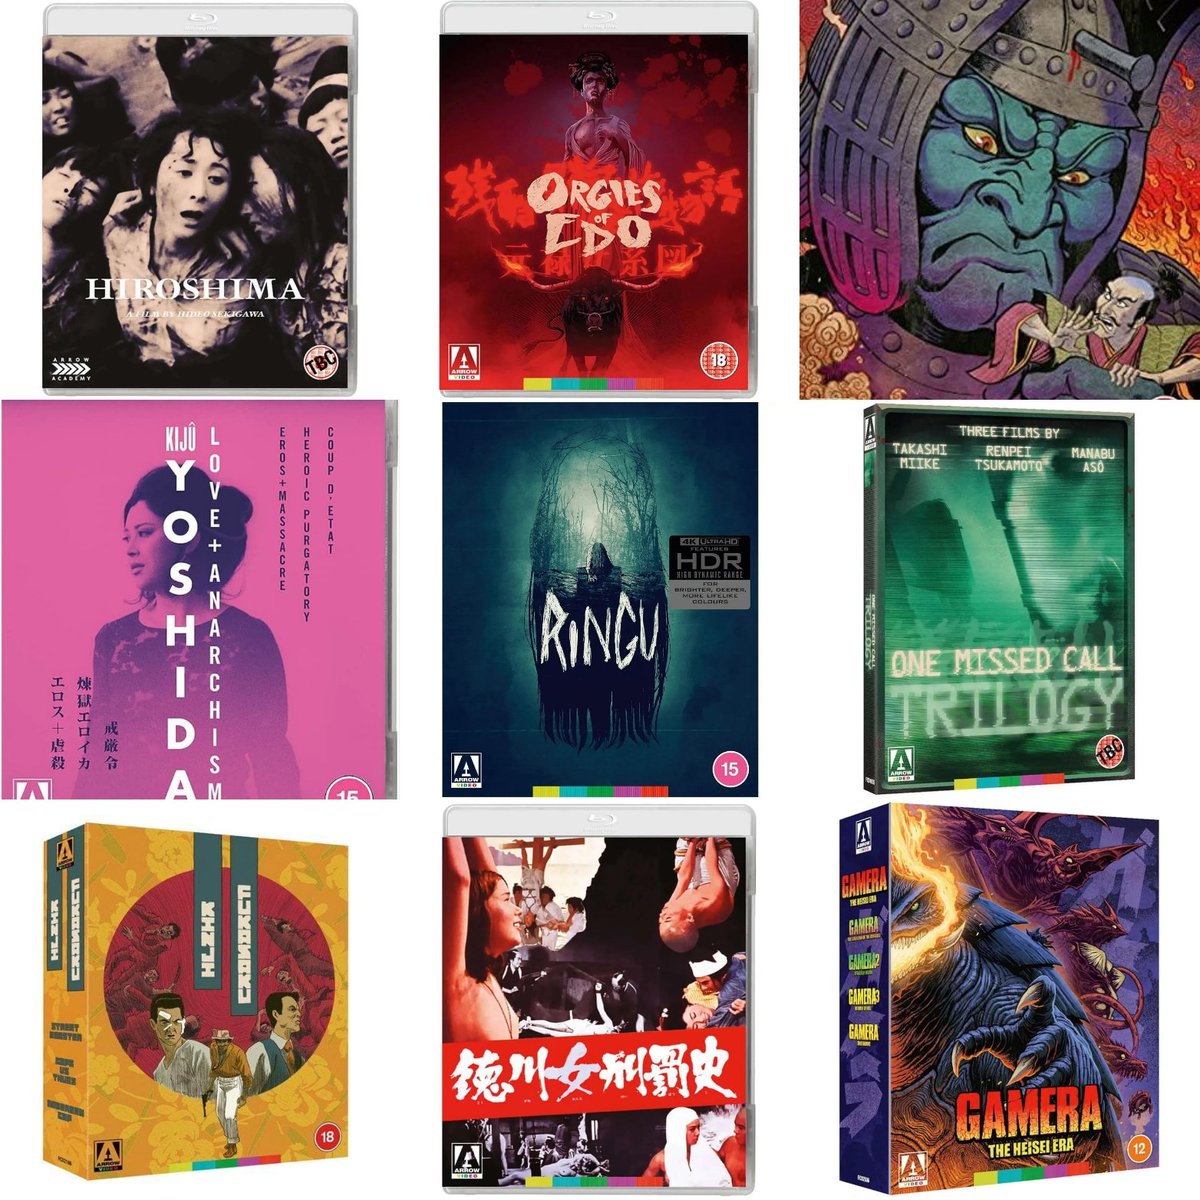 A selection of great Arrow titles on the #terracottastore

Shop.terracottadistribution.com 

#arrowvideo #bluraycollection #boutiquebluray #moviecollection #film #movies #bluray #dvd #asiancinema